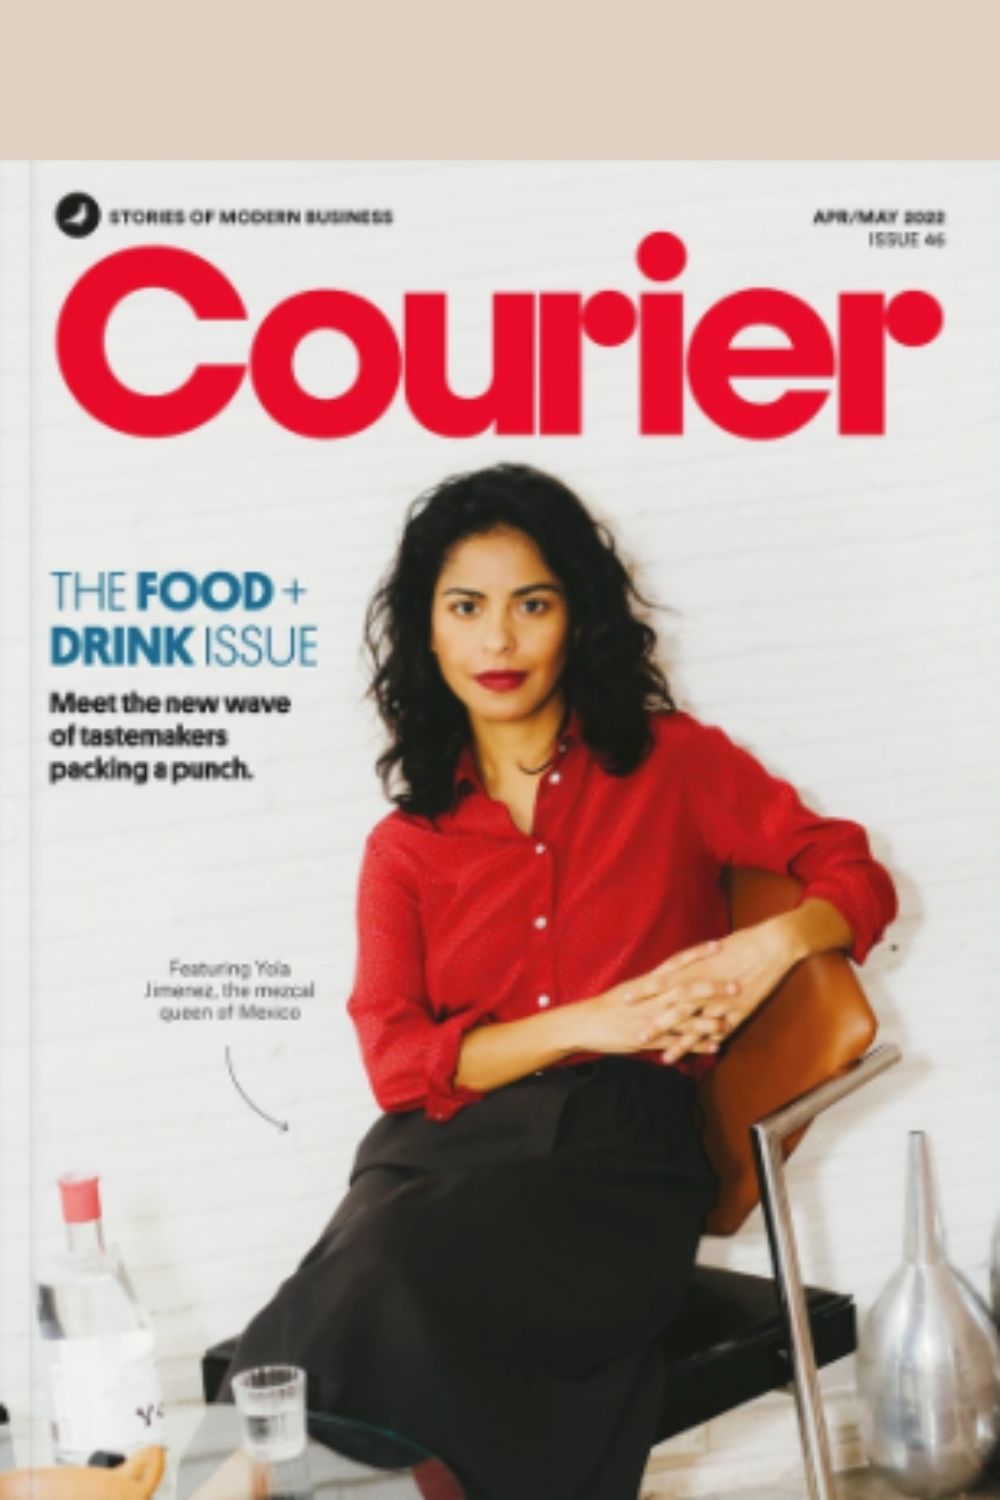 Courier Magazine Issue 46 - Food & Drink 